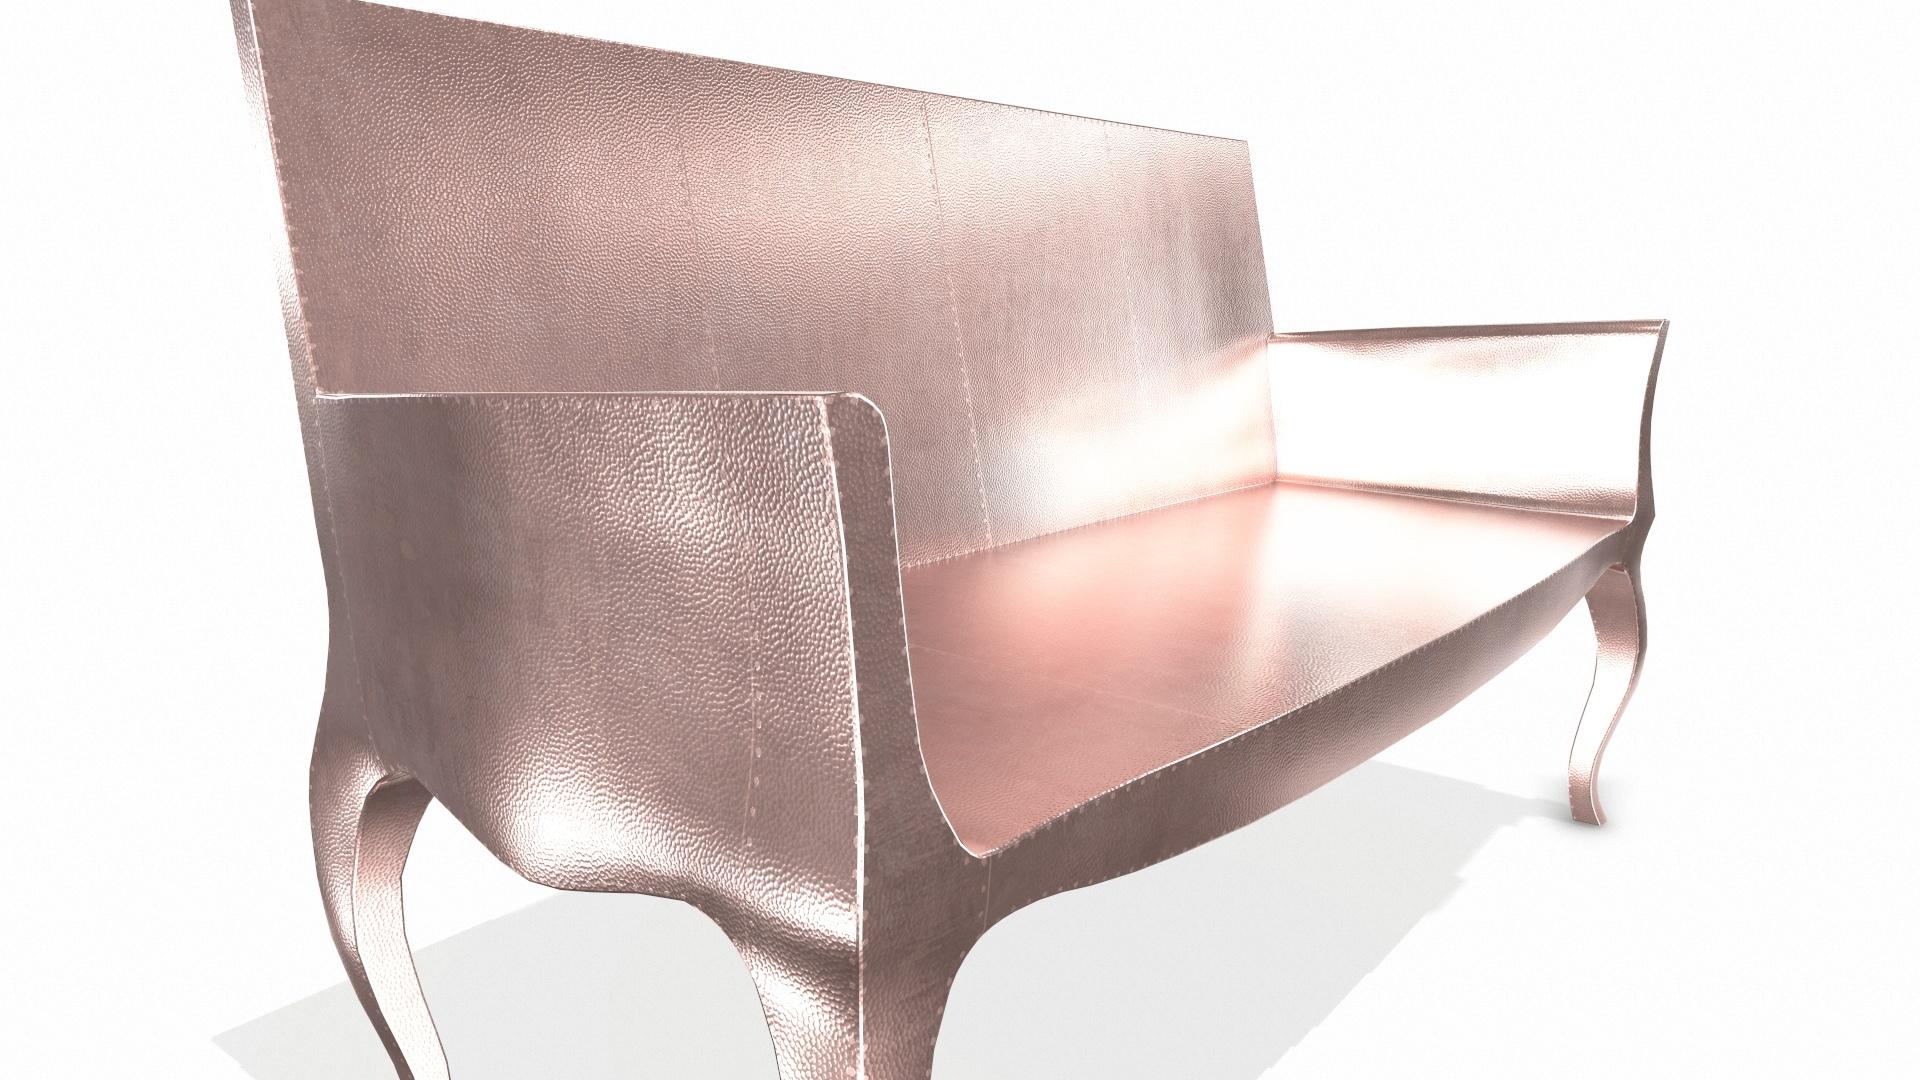 Metal Louise Settee Art Deco Benches in Mid. Hammered Copper by Paul Mathieu For Sale